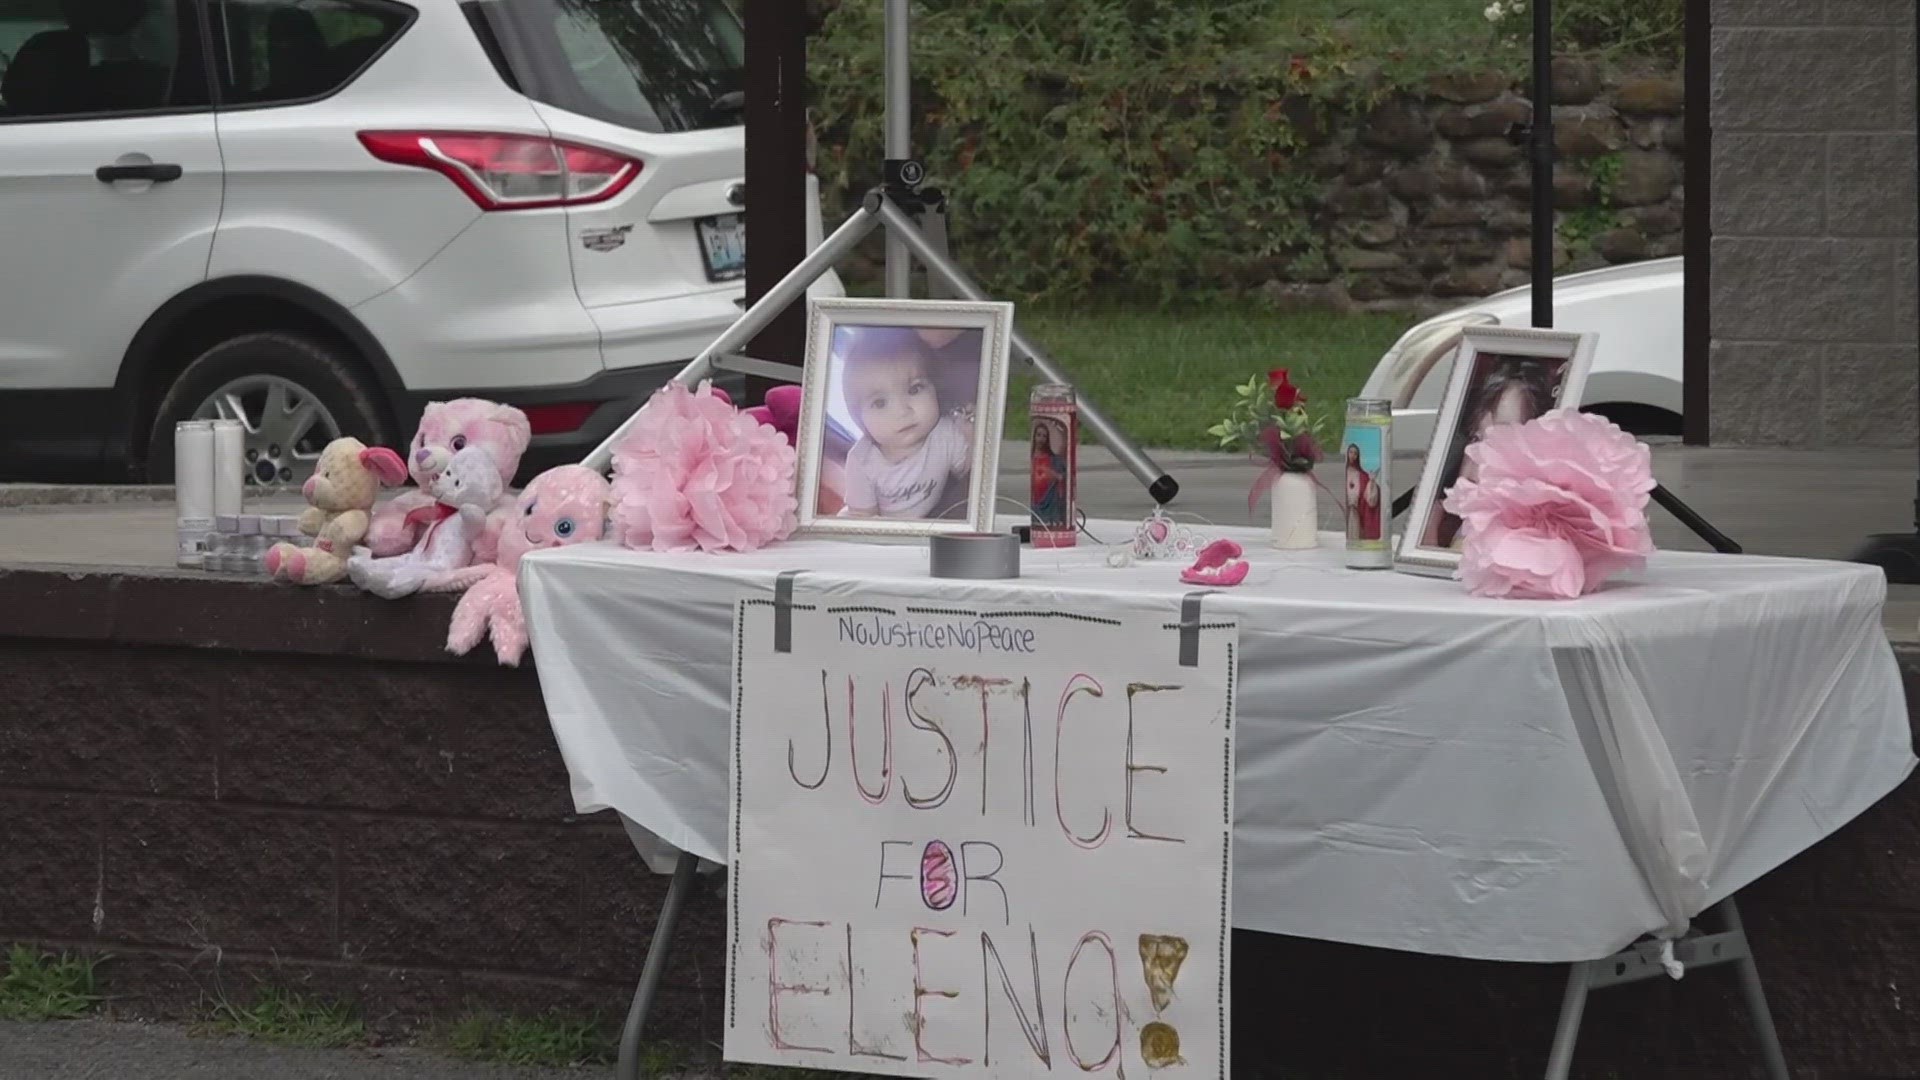 The Middlesboro community rallies behind baby Elena who died after she was abused. A petition asks lawmakers to raise the bar when punishing offenders.